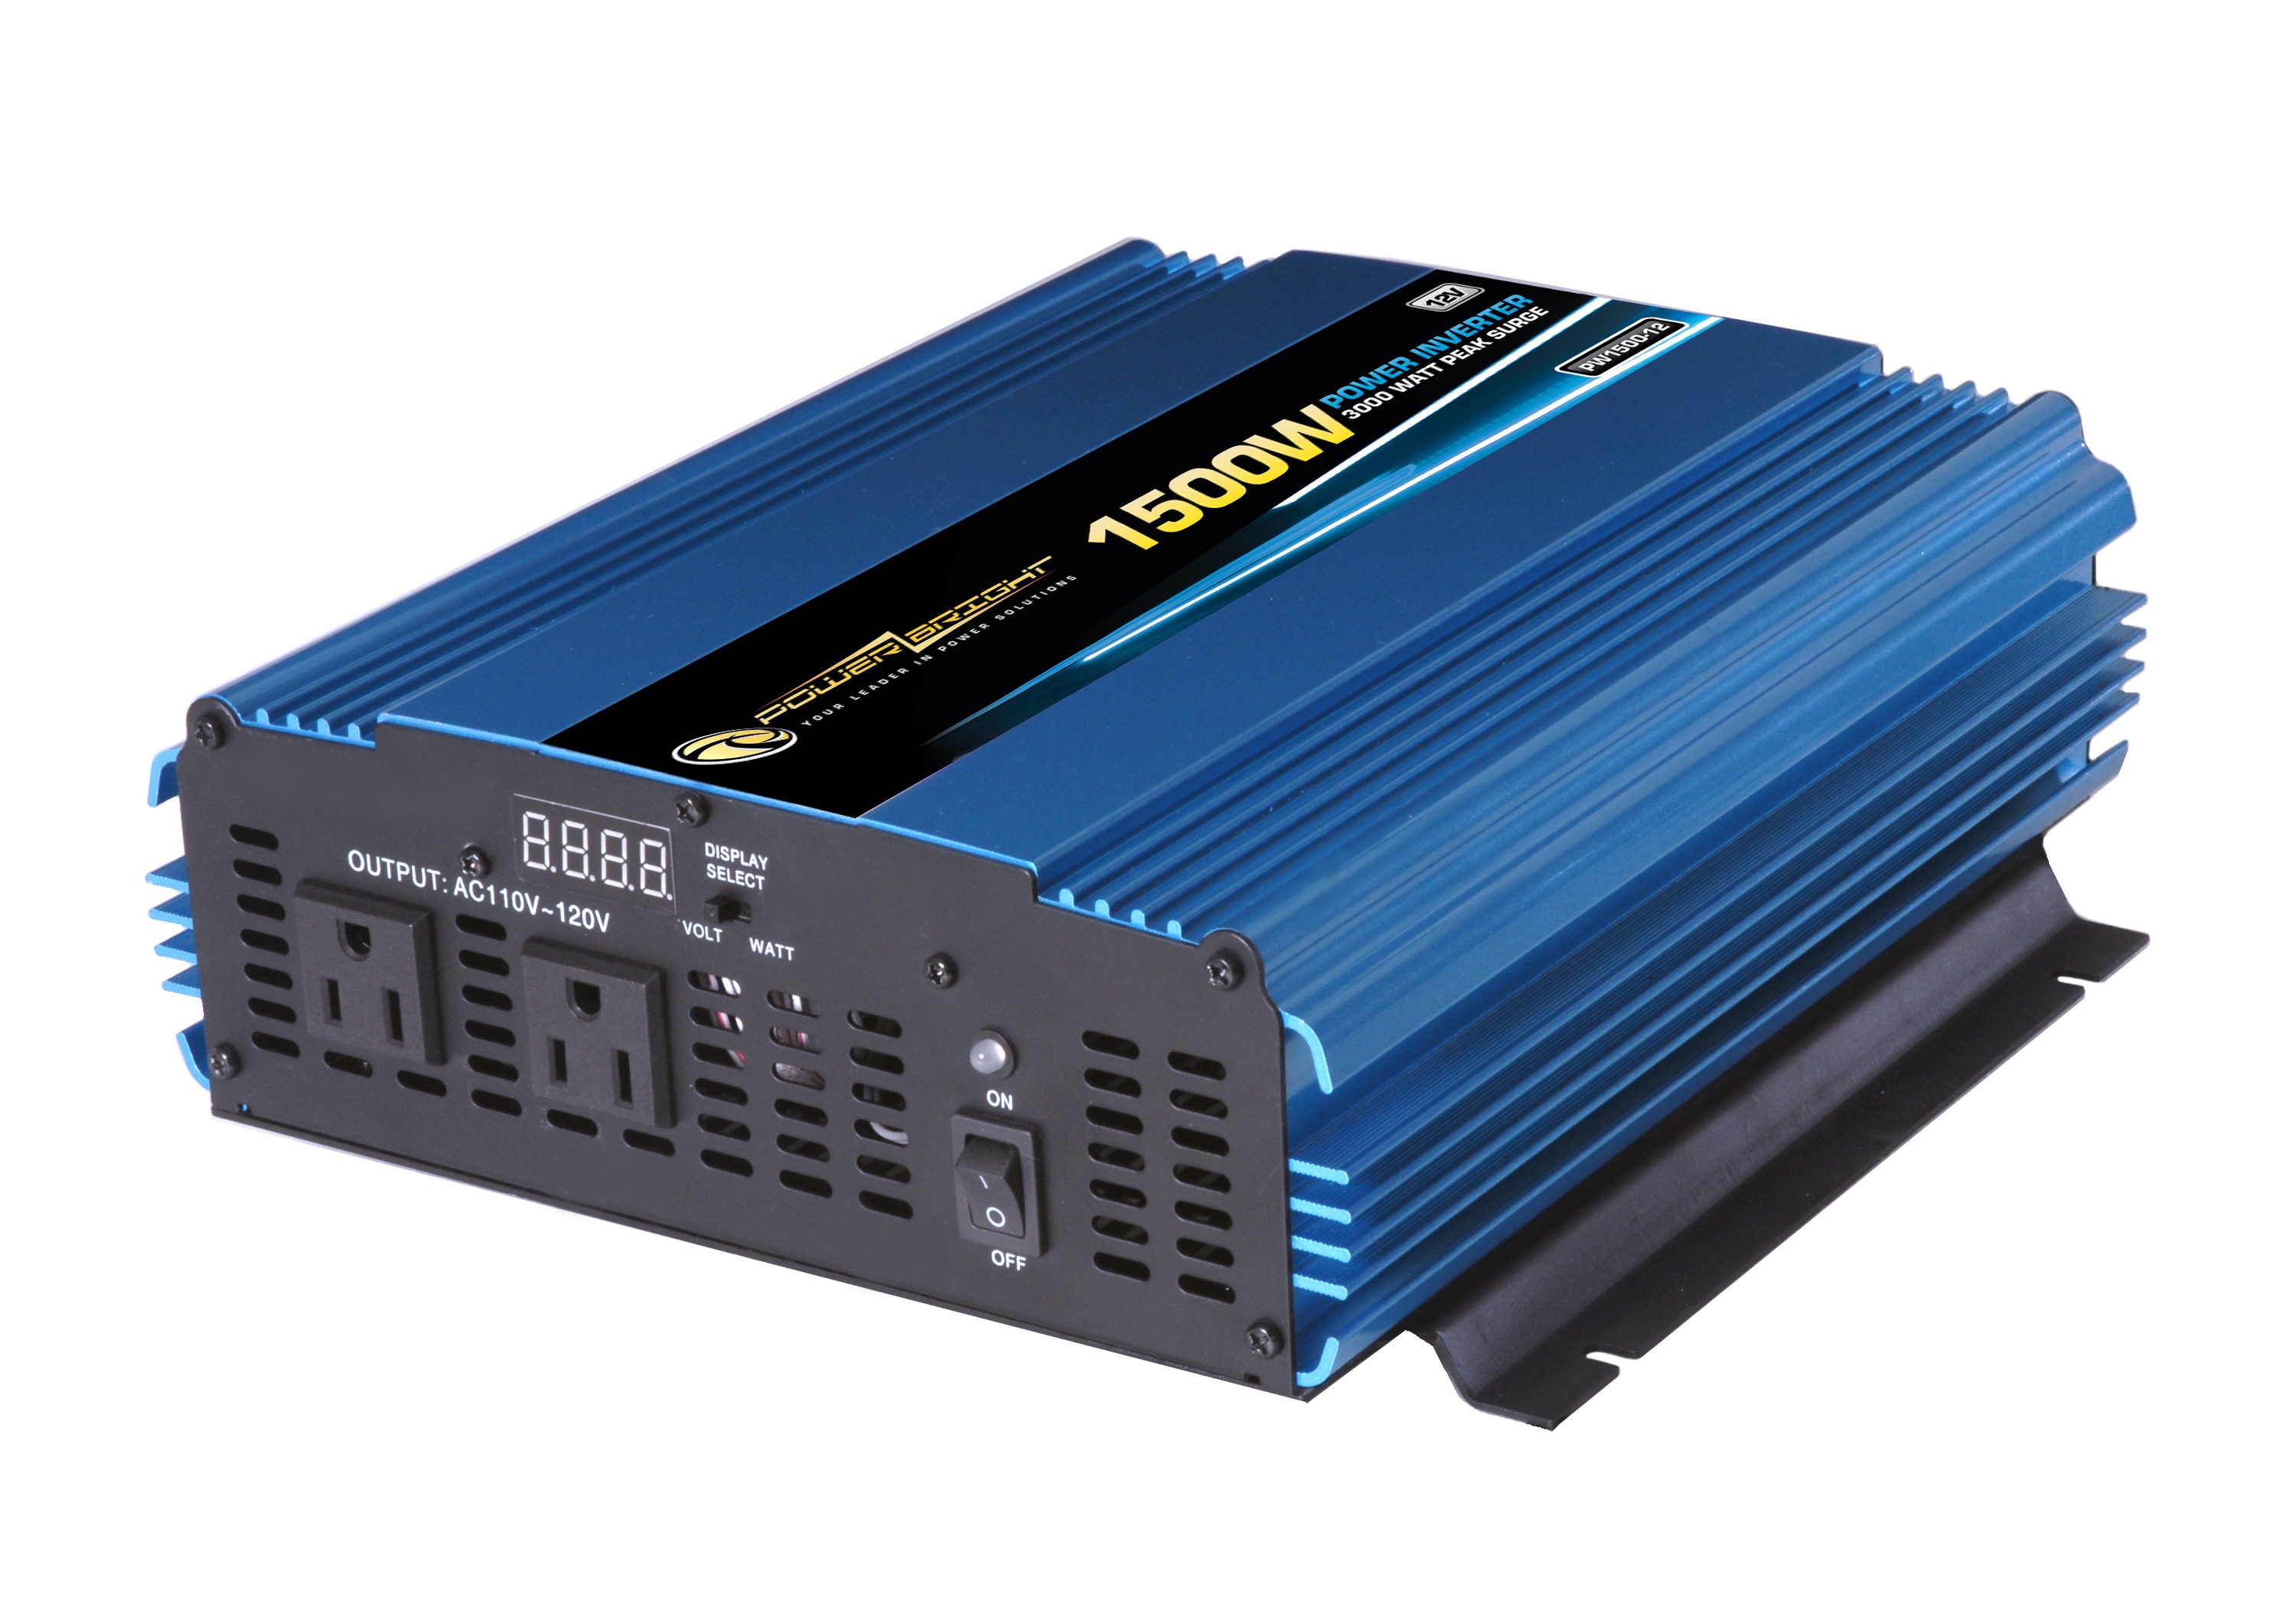 Power Bright 1500-Watt DC to AC Power Inverter with 12.5 Amps Continuous  Output - Anodized Aluminum Case